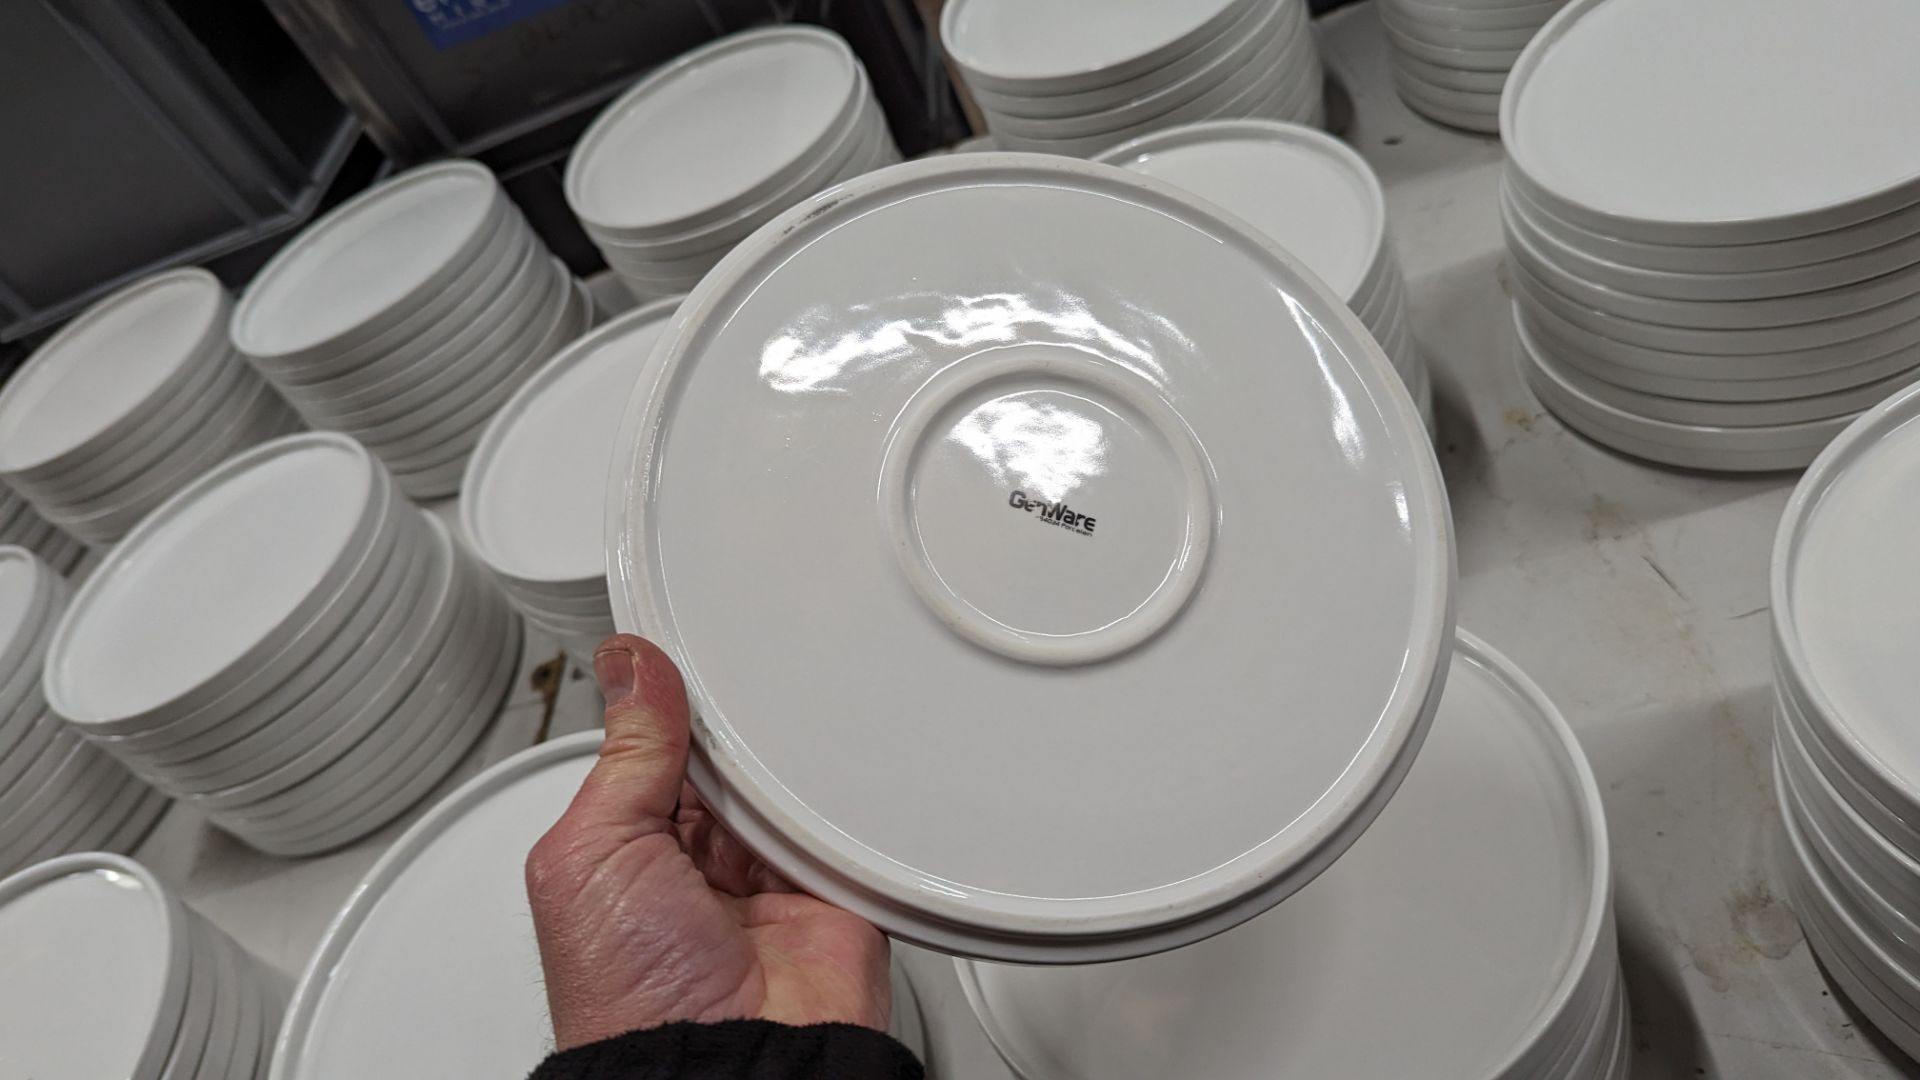 60 off Genware 245mm round flat plates with upright rim to the outer edge - Image 6 of 6